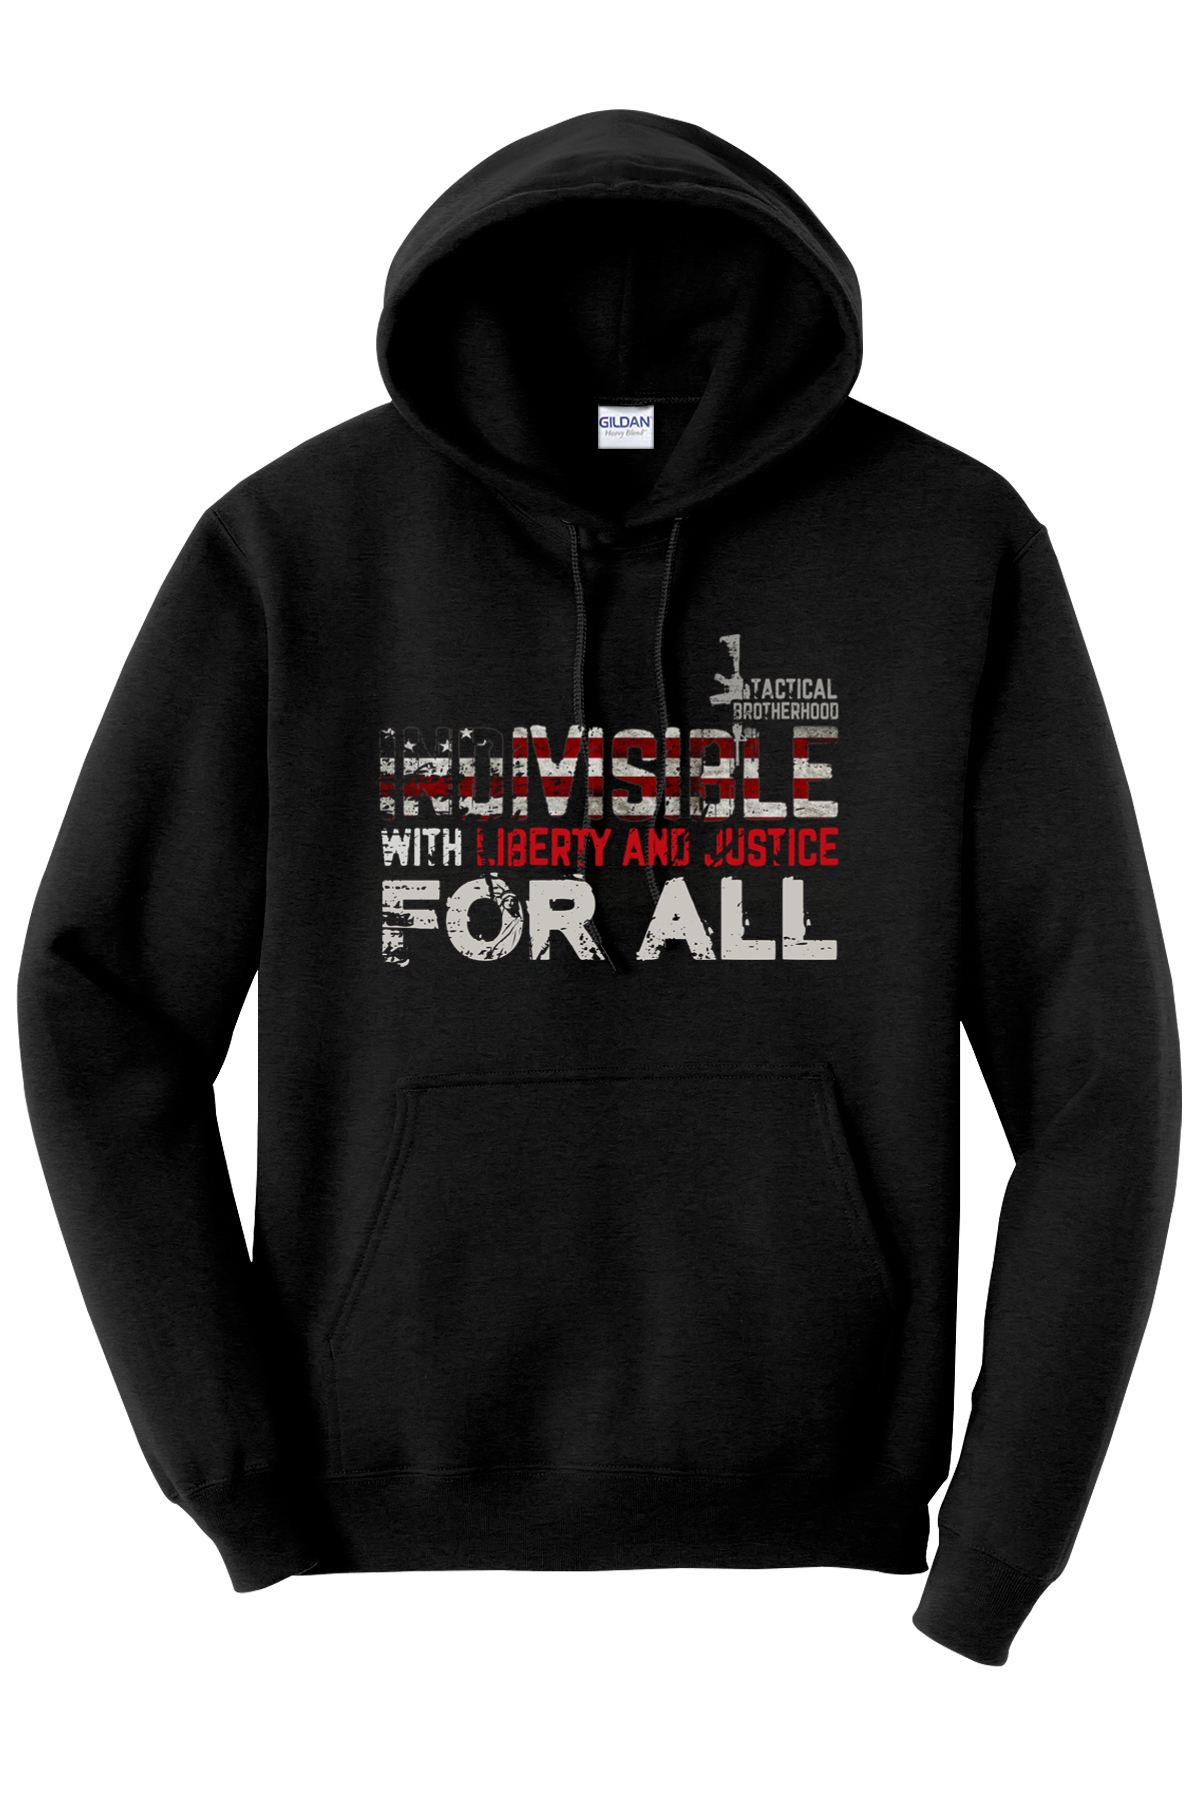 OG2 Indivisible Hoodie